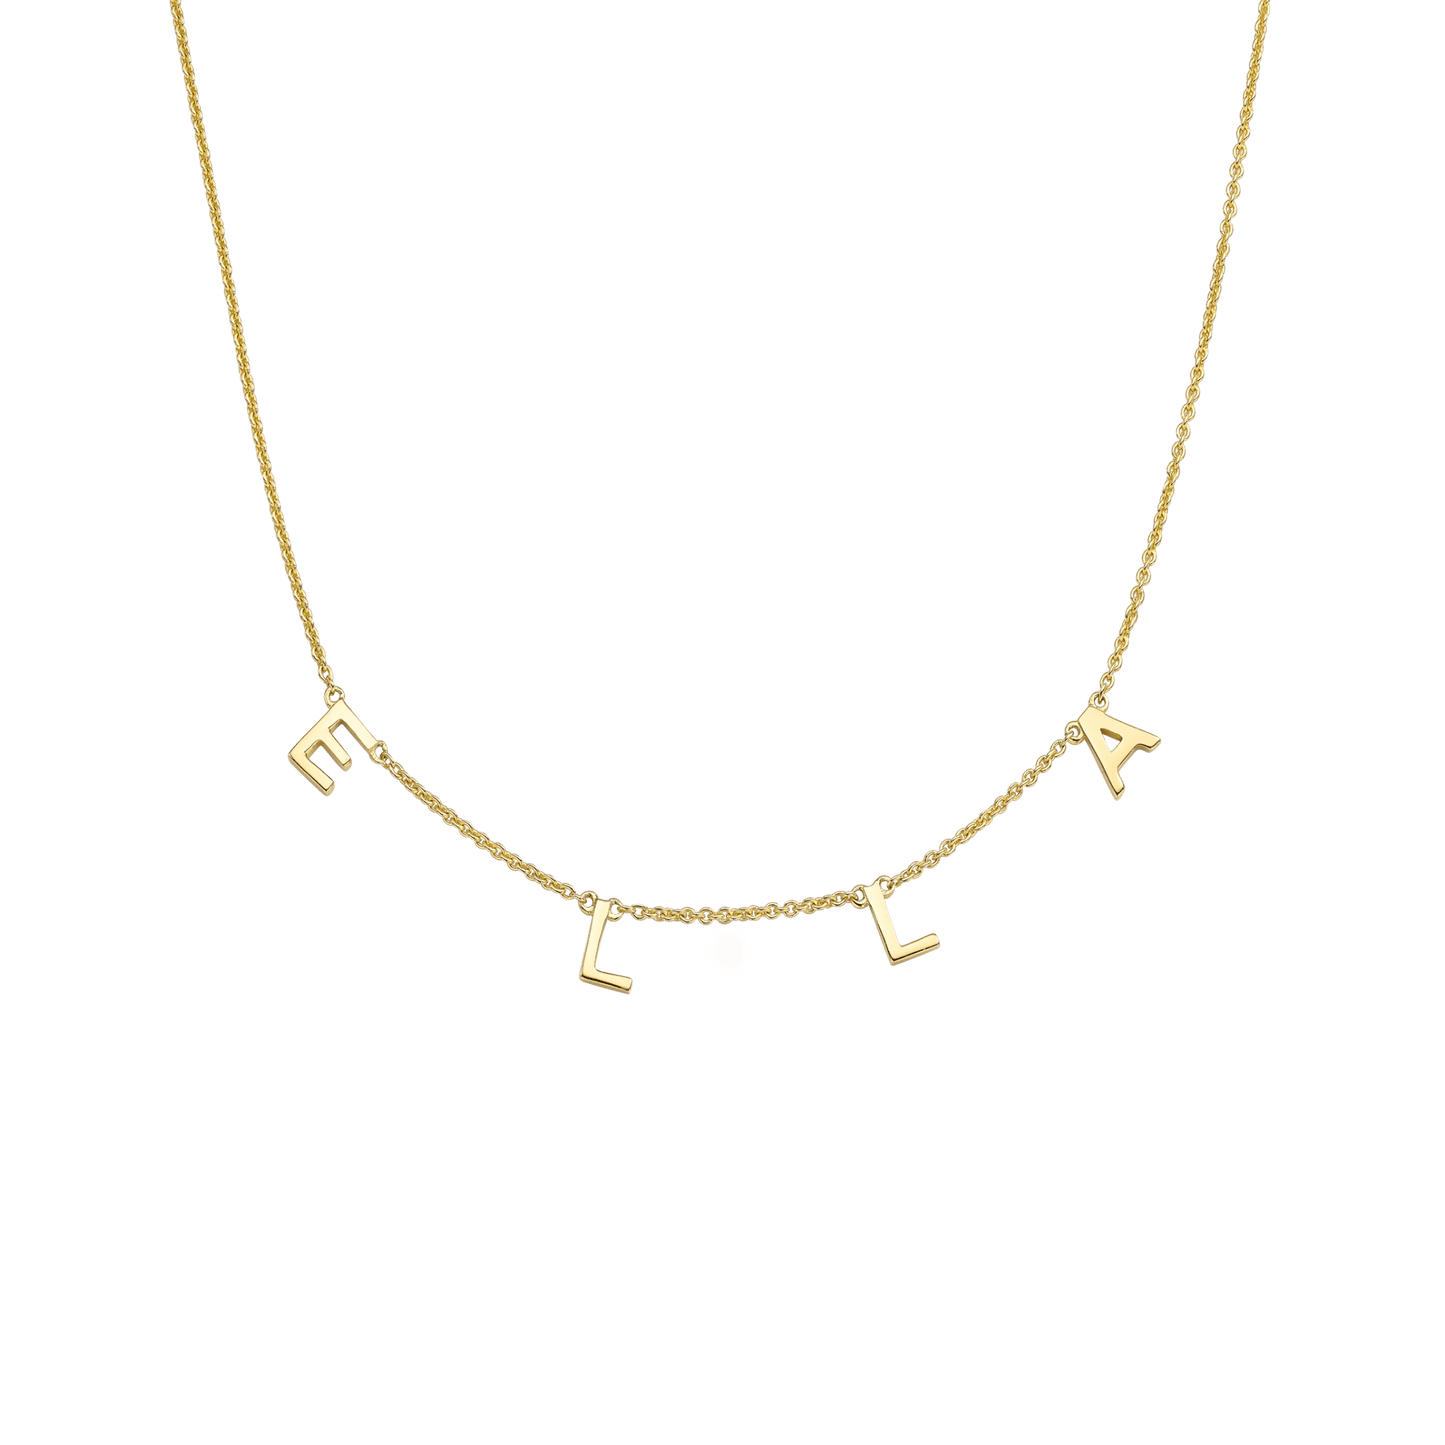 Name Necklace - 14K Yellow Gold Necklaces magal-dev 1 Initial Adjustable 16-17" (40cm-43cm) 